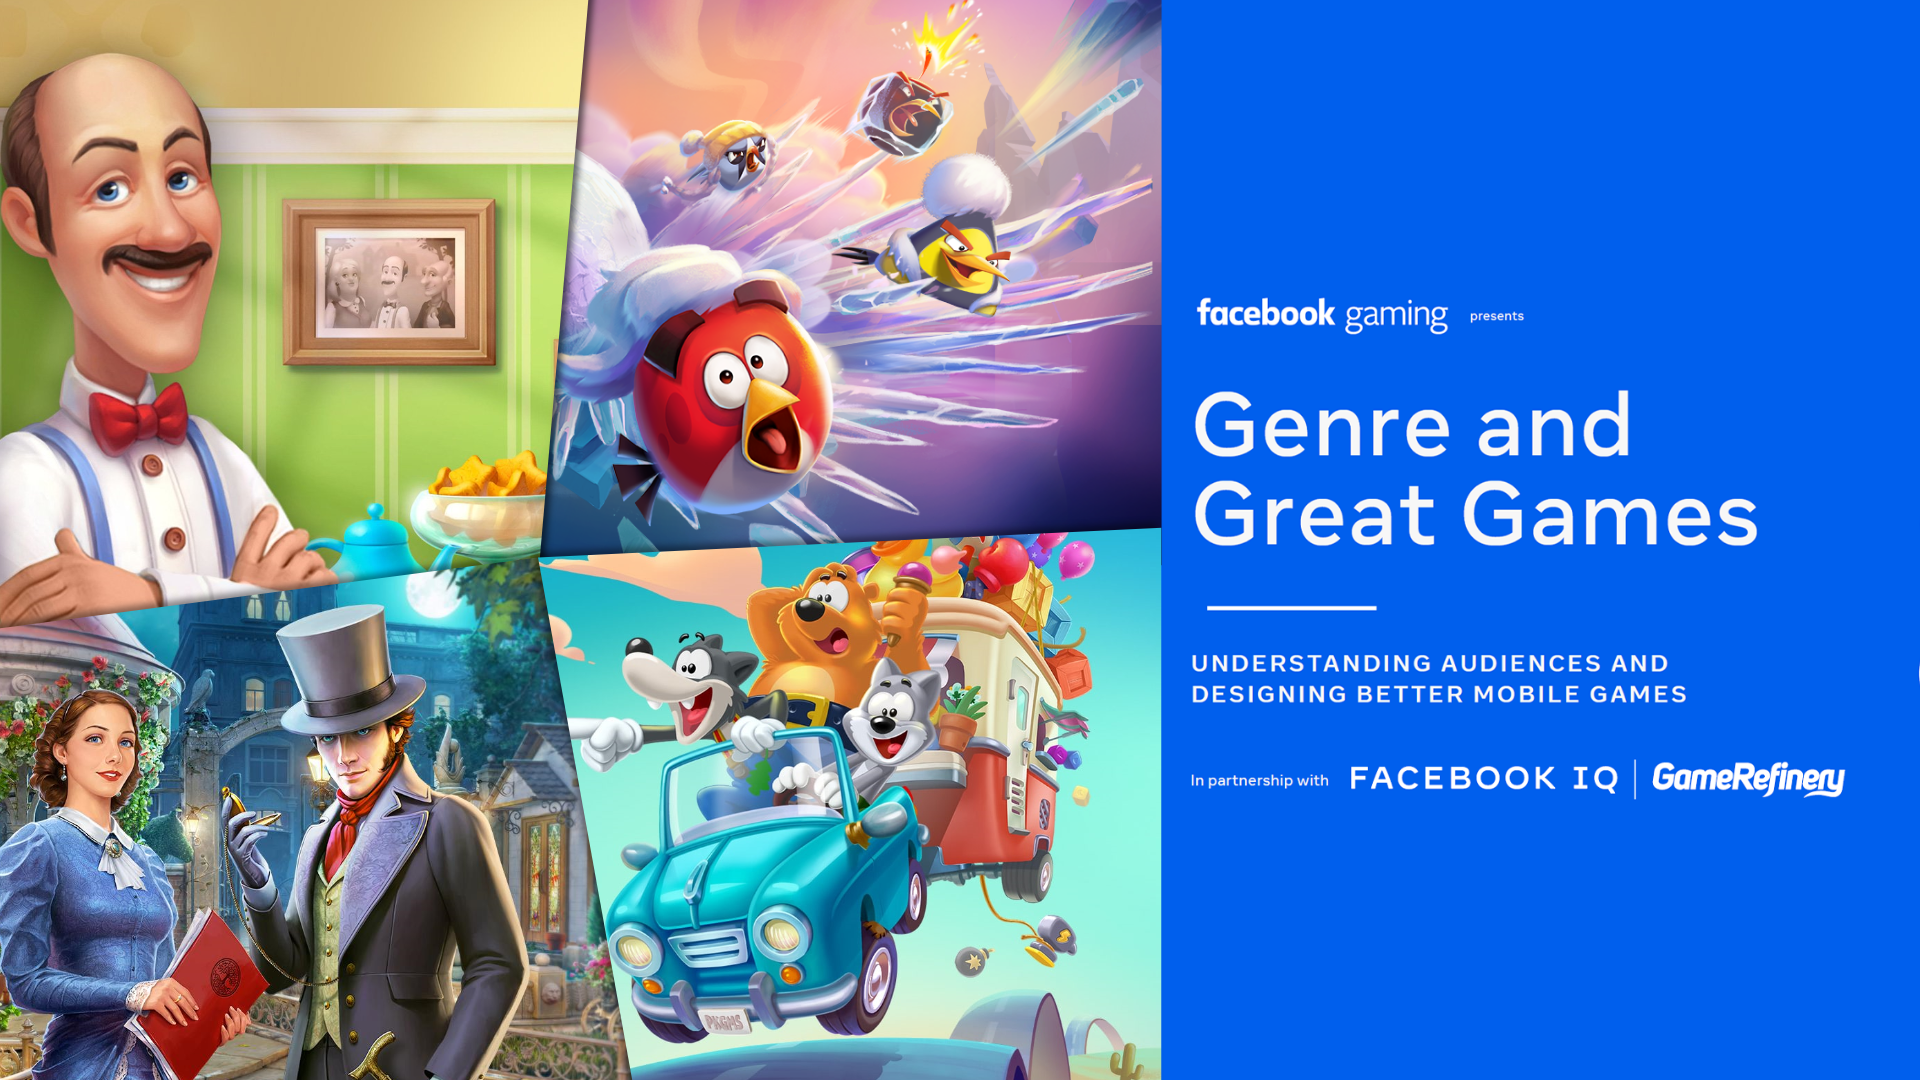 Puzzle Game Features – Genre and Great Games Report Highlights